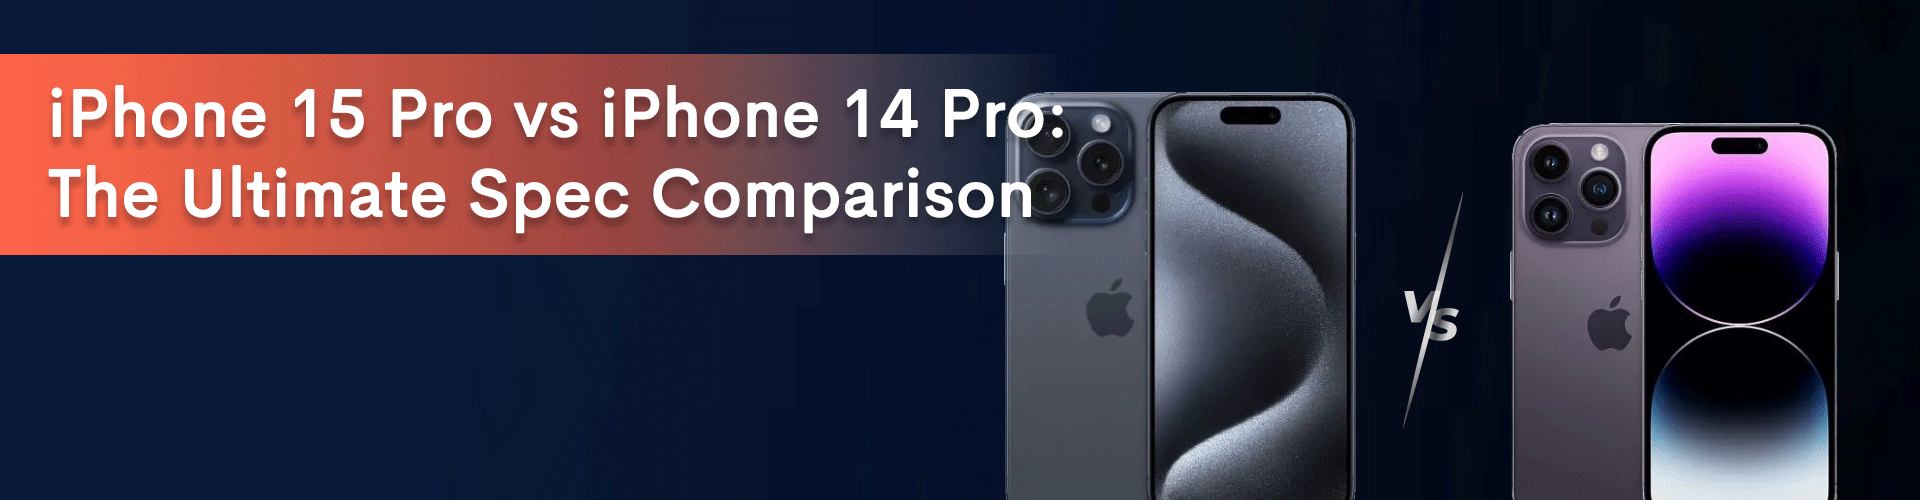 banner image for our blog on iPhone 15 Pro vs iPhone 14 Pro : the Ultimate Spec Comparison